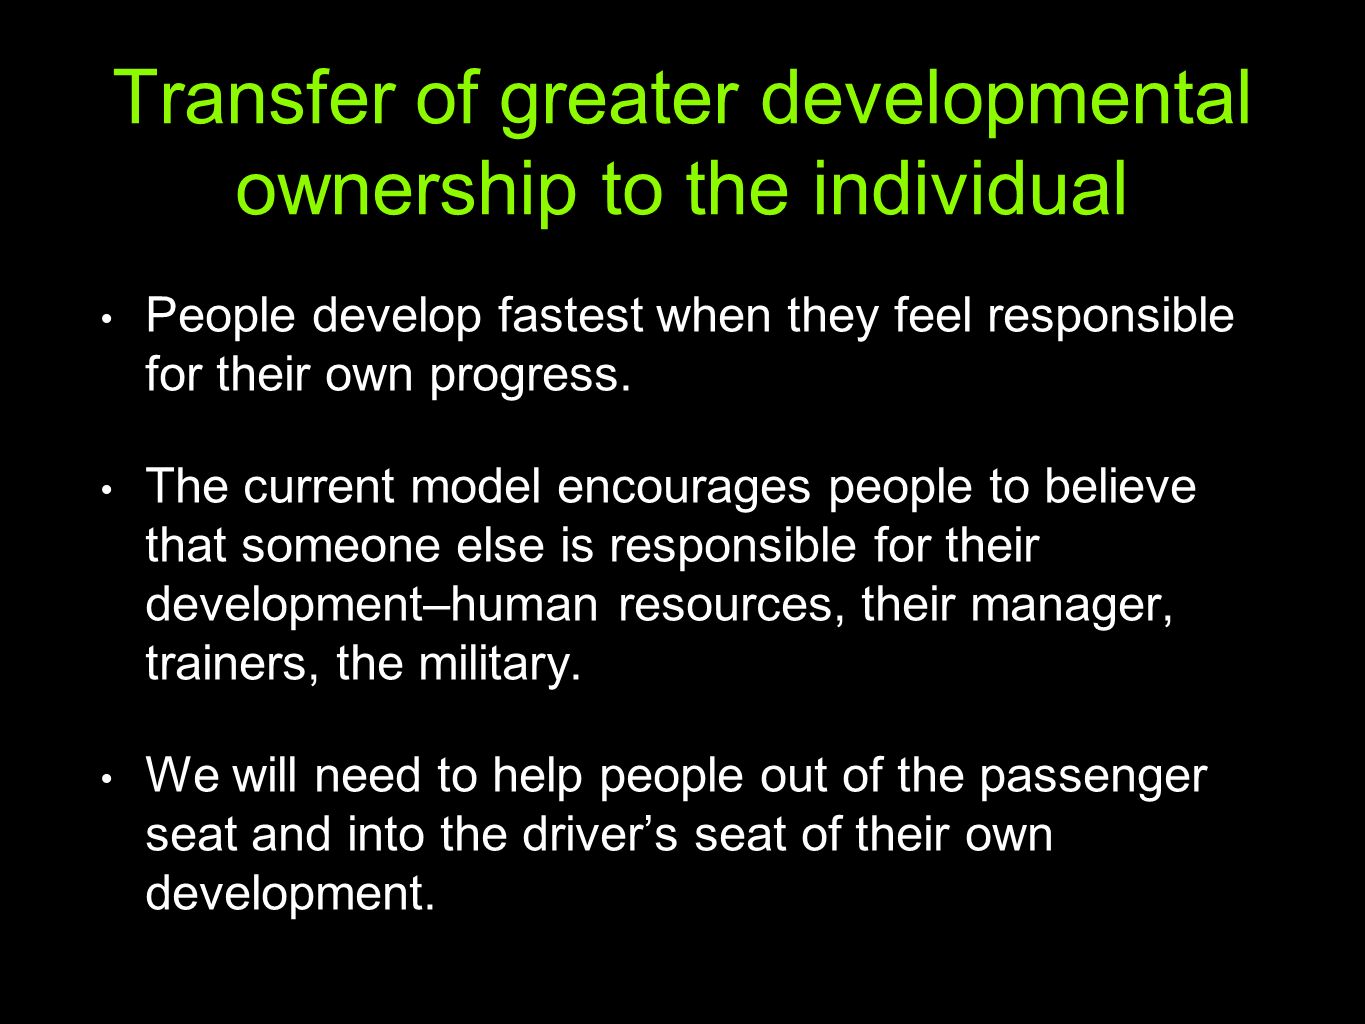 Transfer of greater developmental ownership to the individual